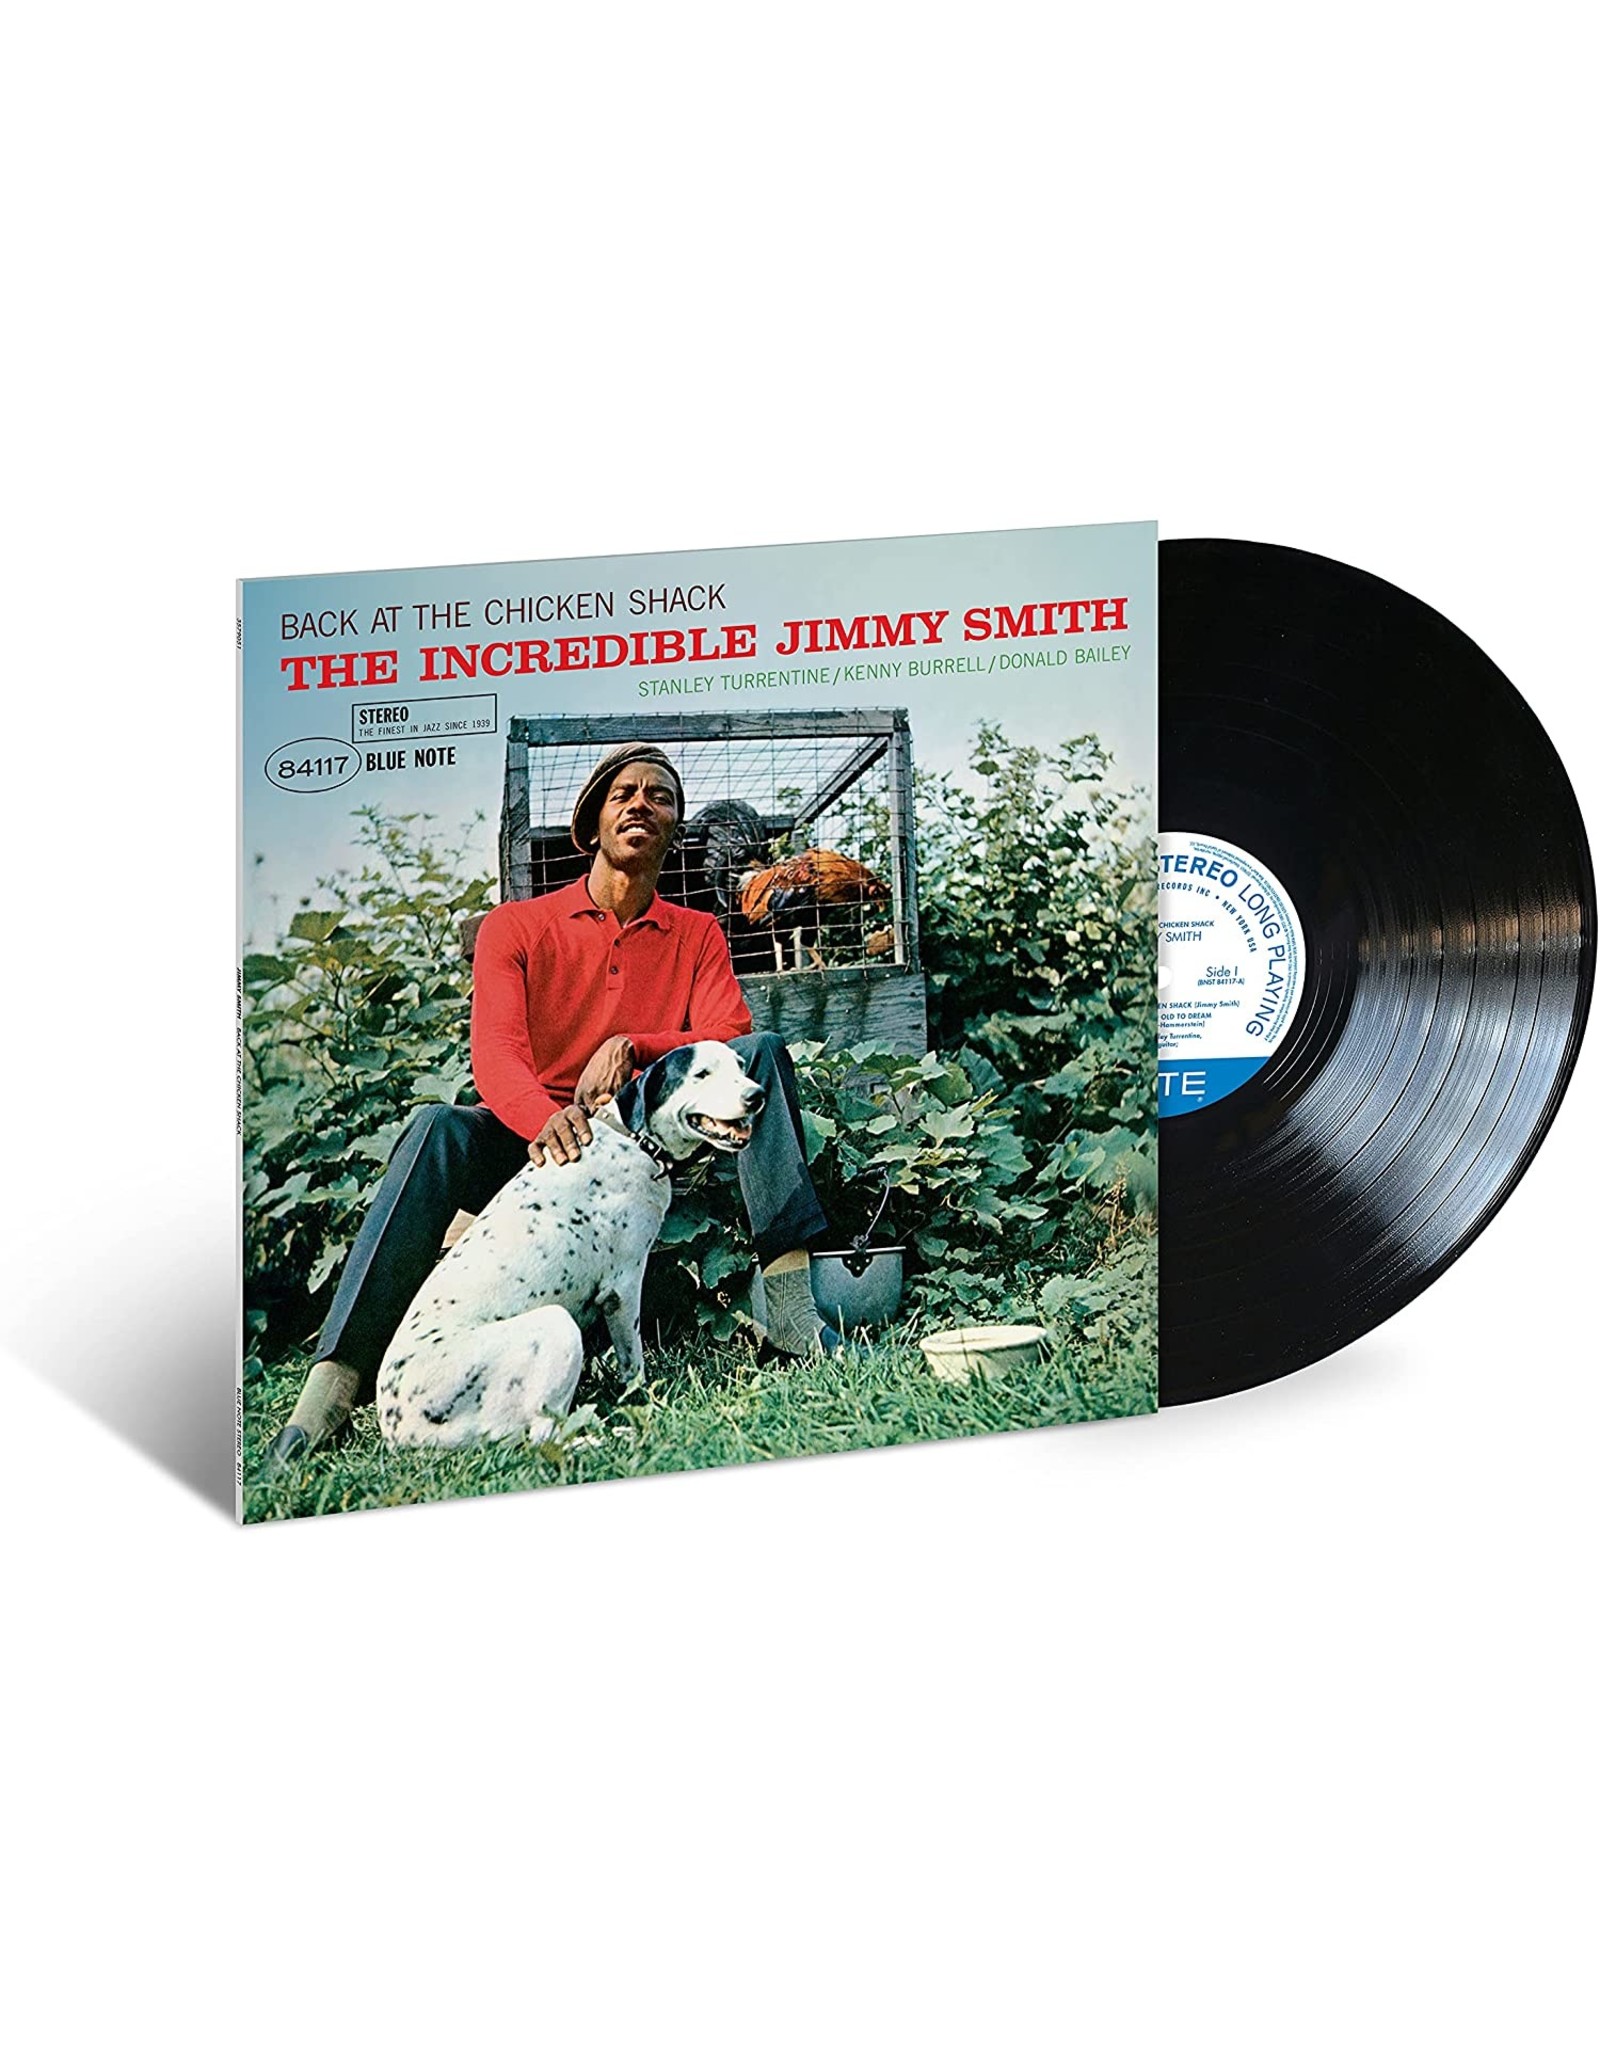 Jimmy Smith - Back at the Chicken Shack (Blue Note Classic)